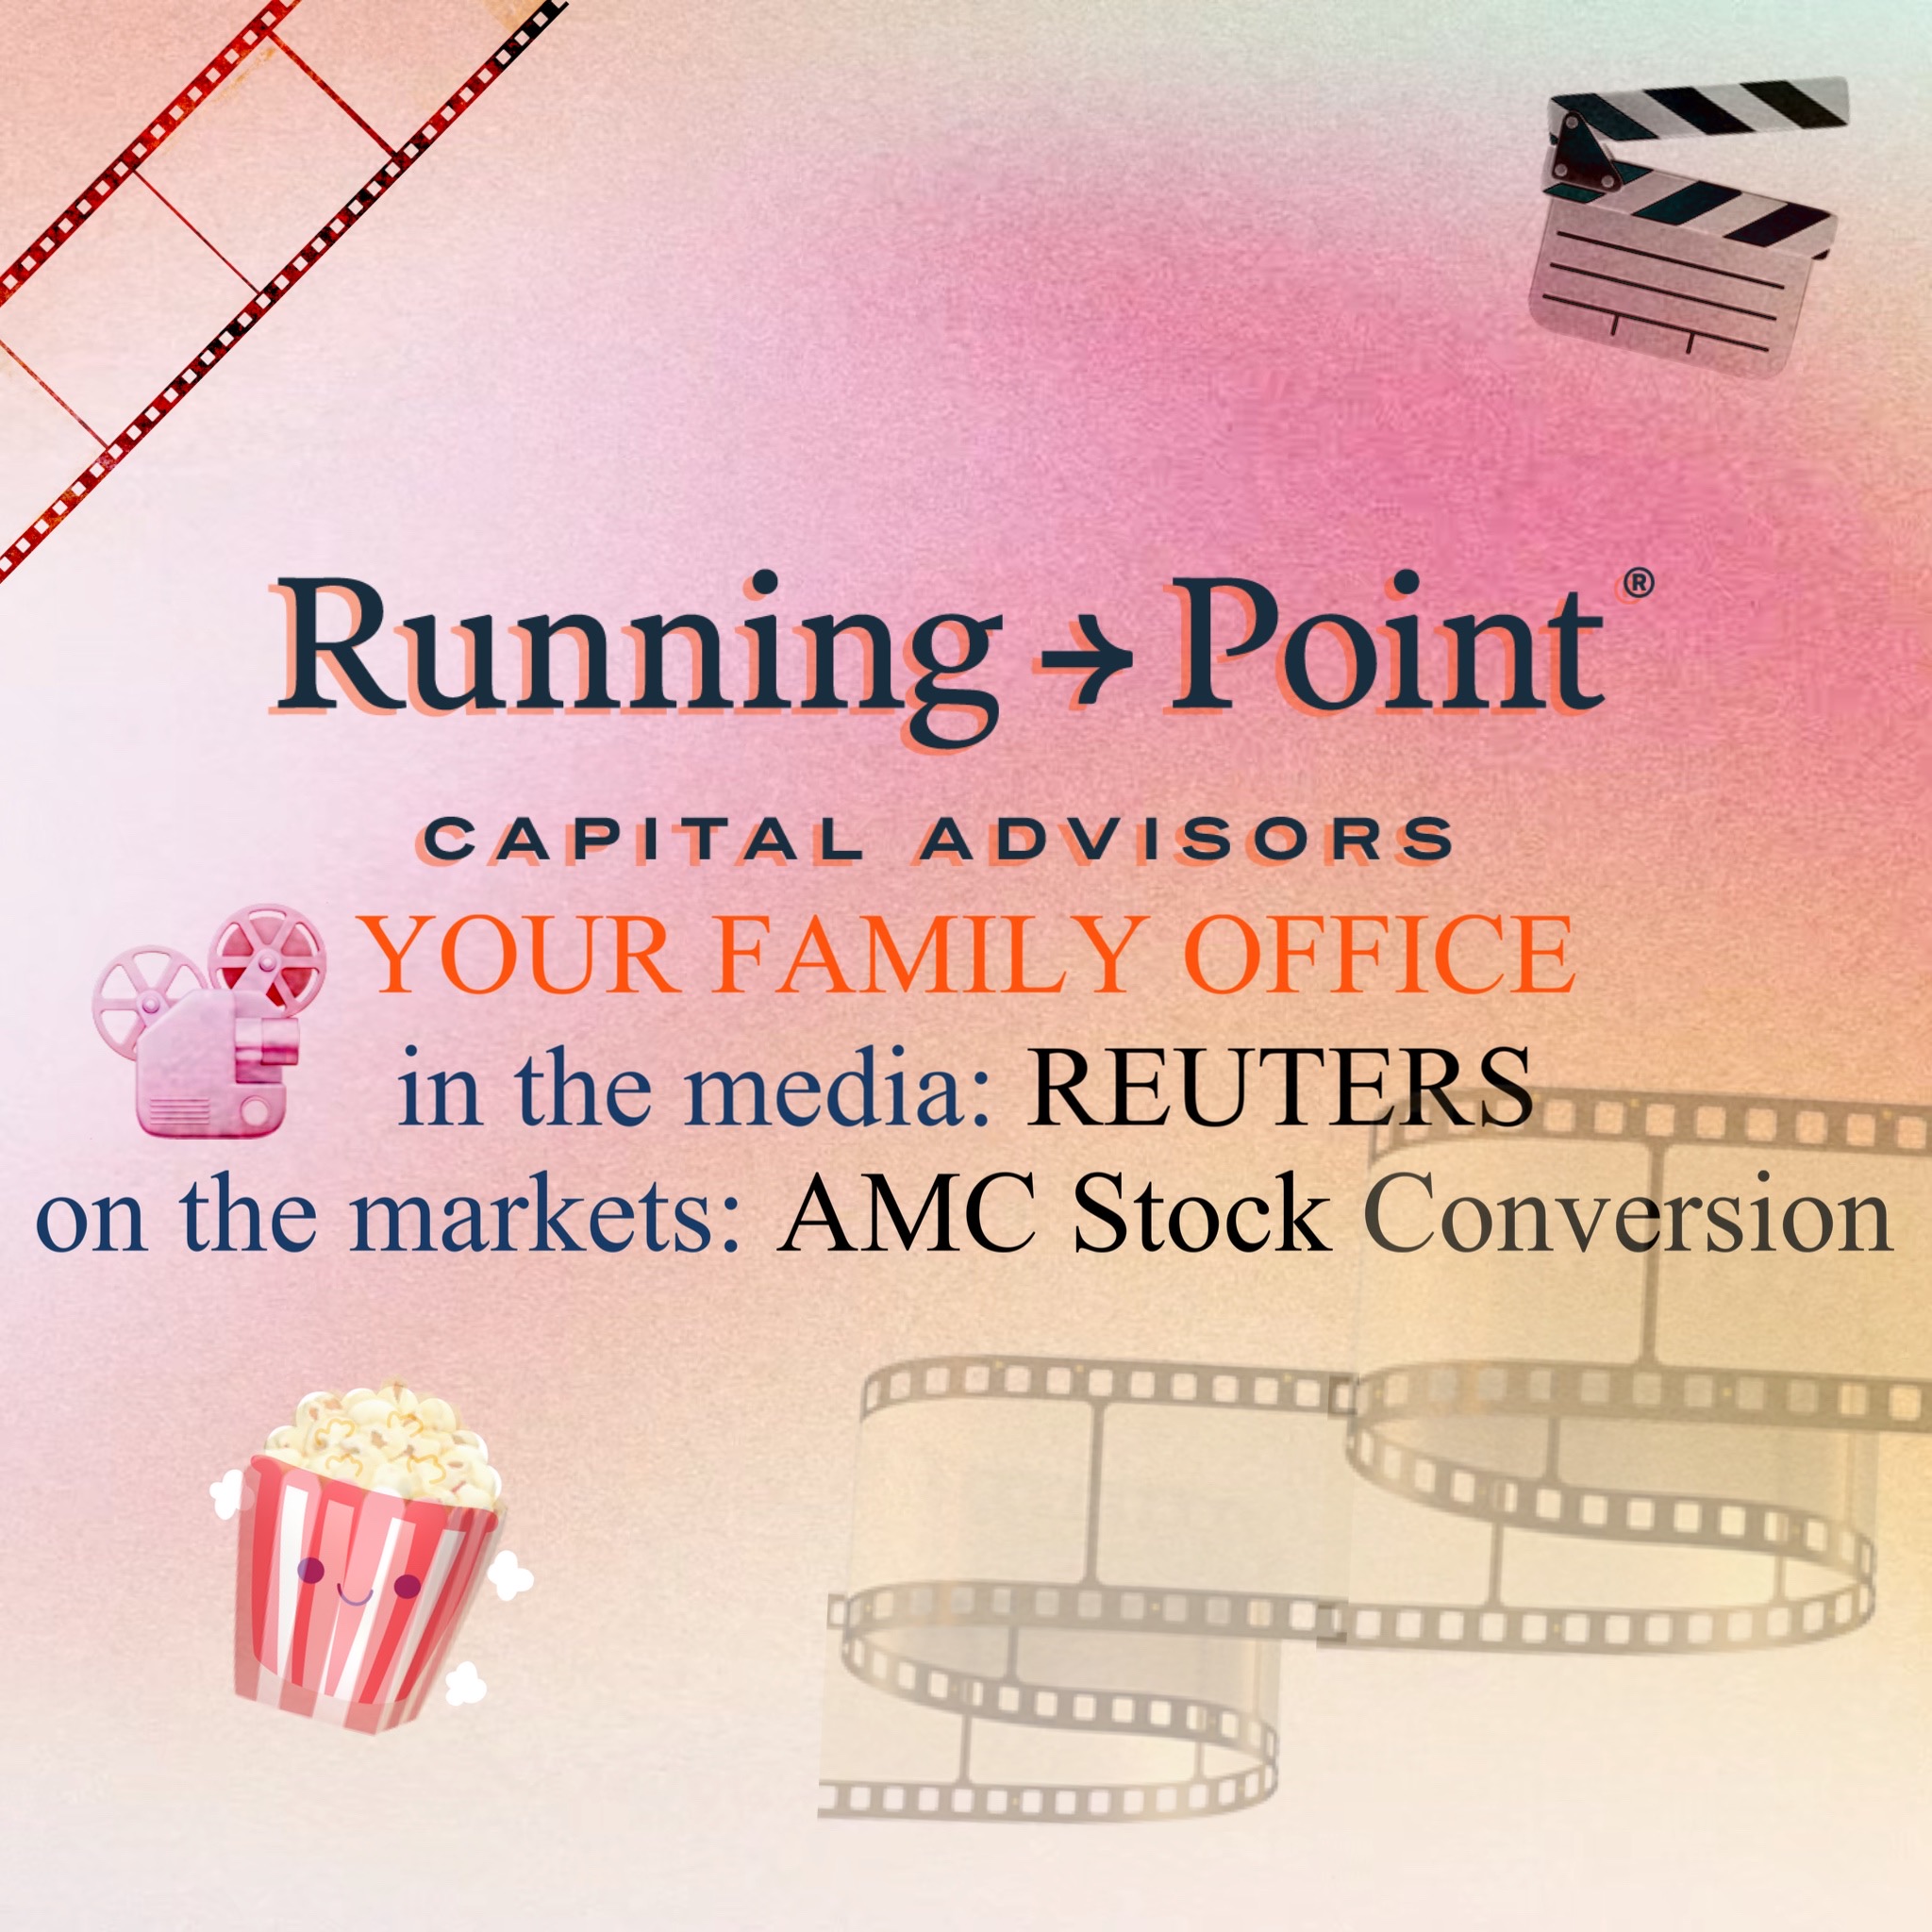 Reuters: AMC Theatres Requests Faster Stock Conversion